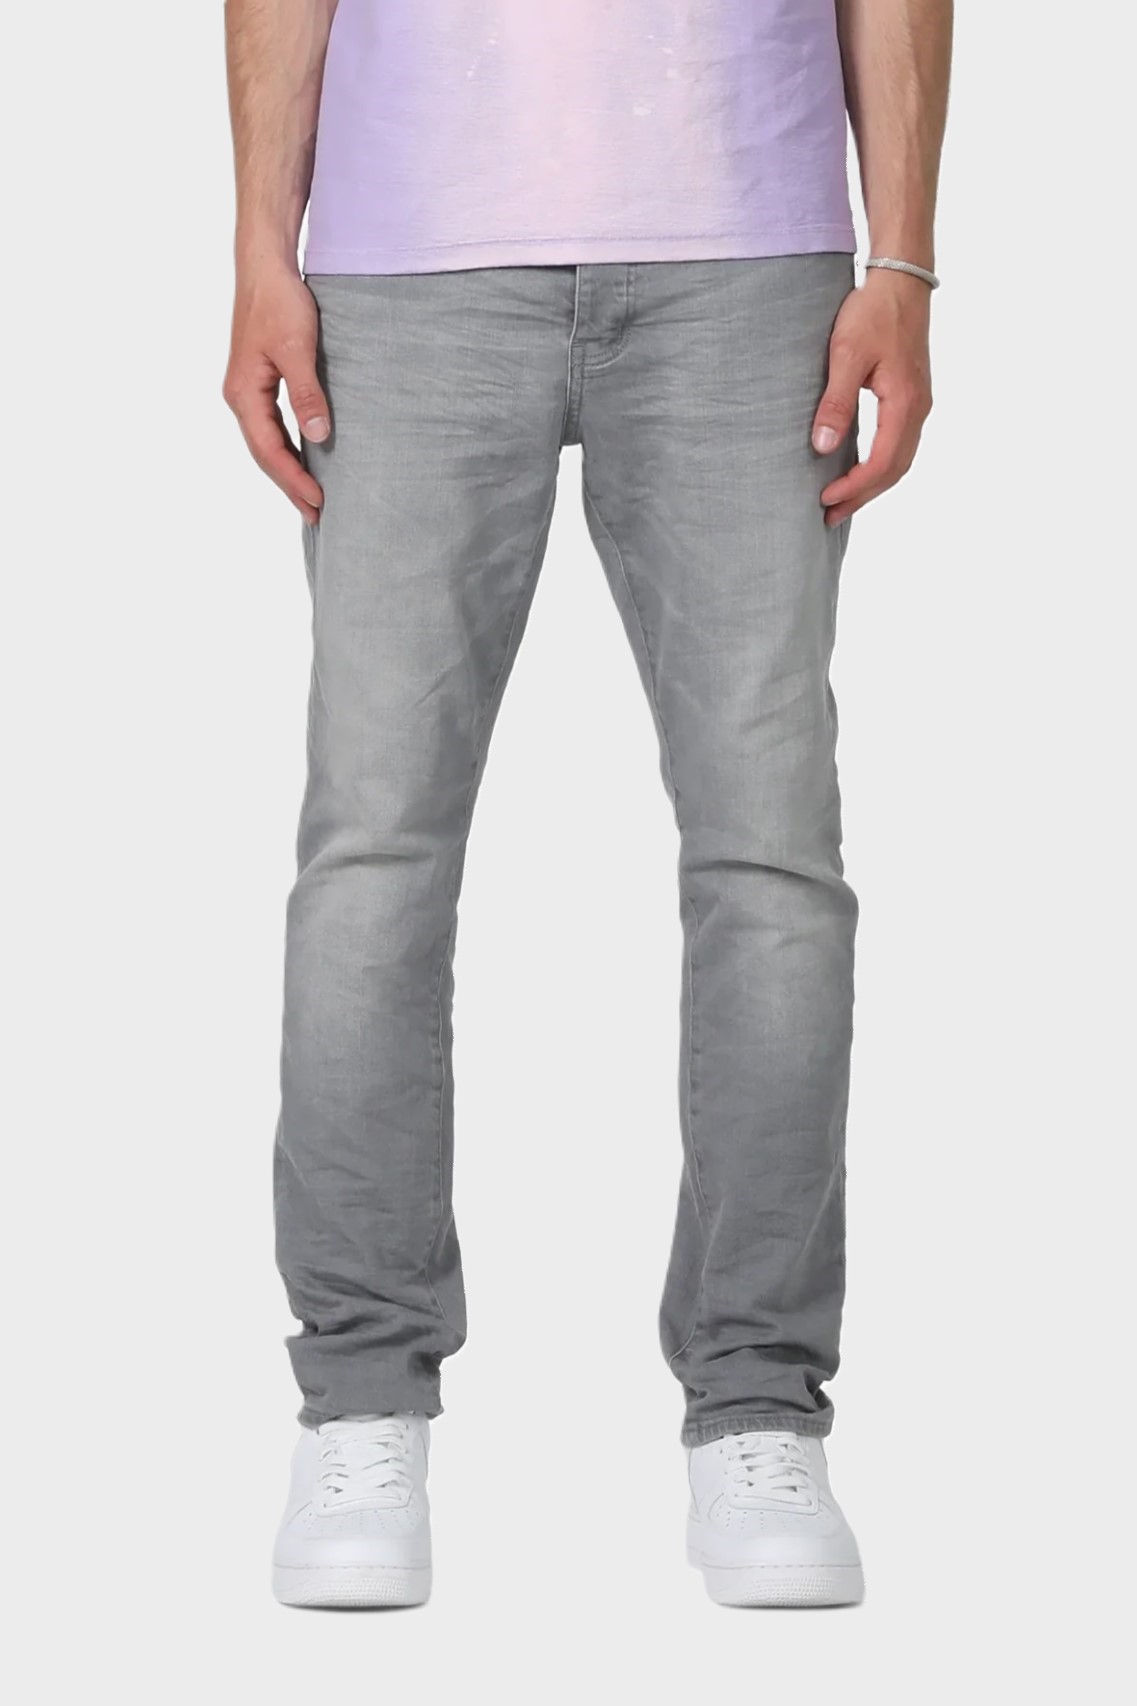 PURPLE-BRAND Jeans P005 in Faded Grey Aged